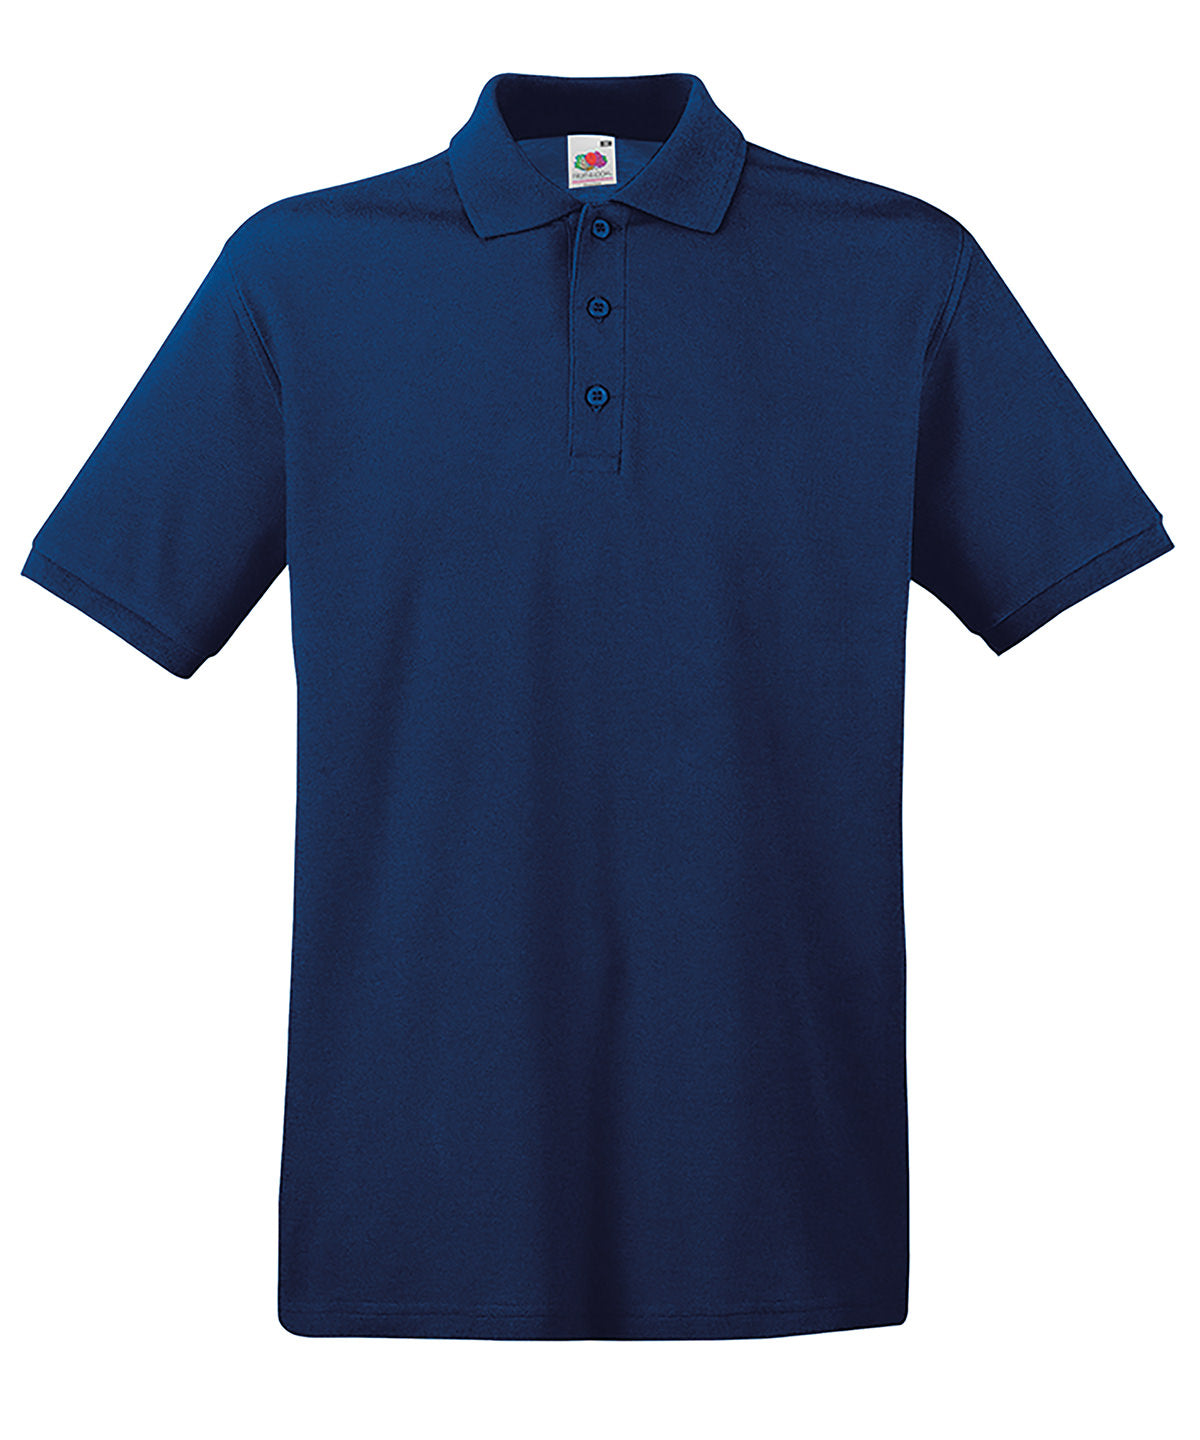 Personalised Polo Shirts - Mid Blue Fruit of the Loom Premium polo